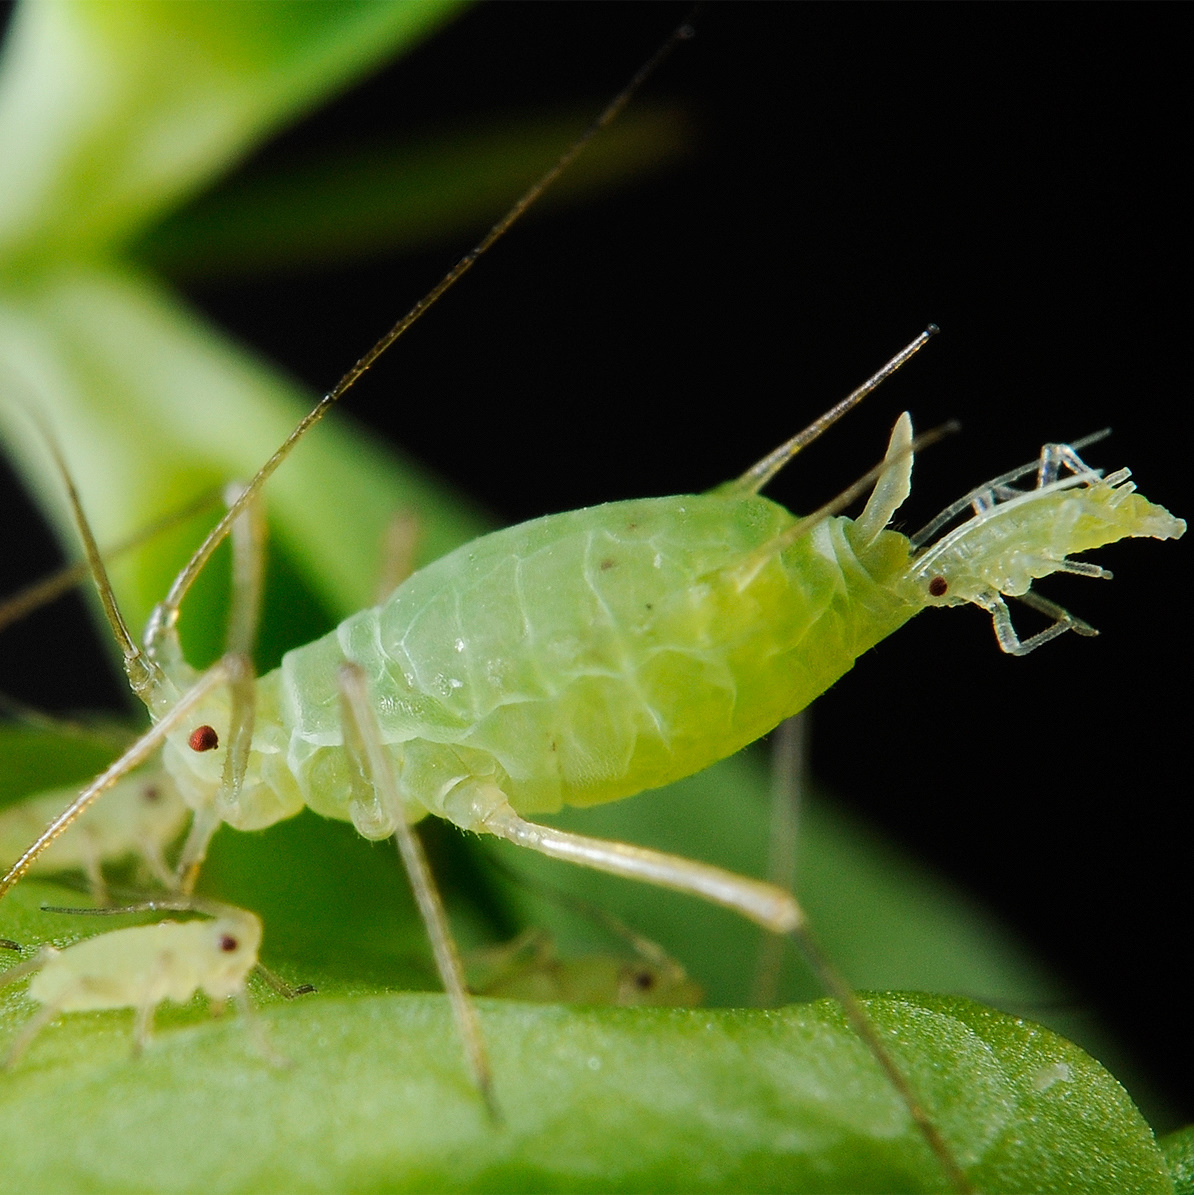 A green female aphid with a young an identical young aphid